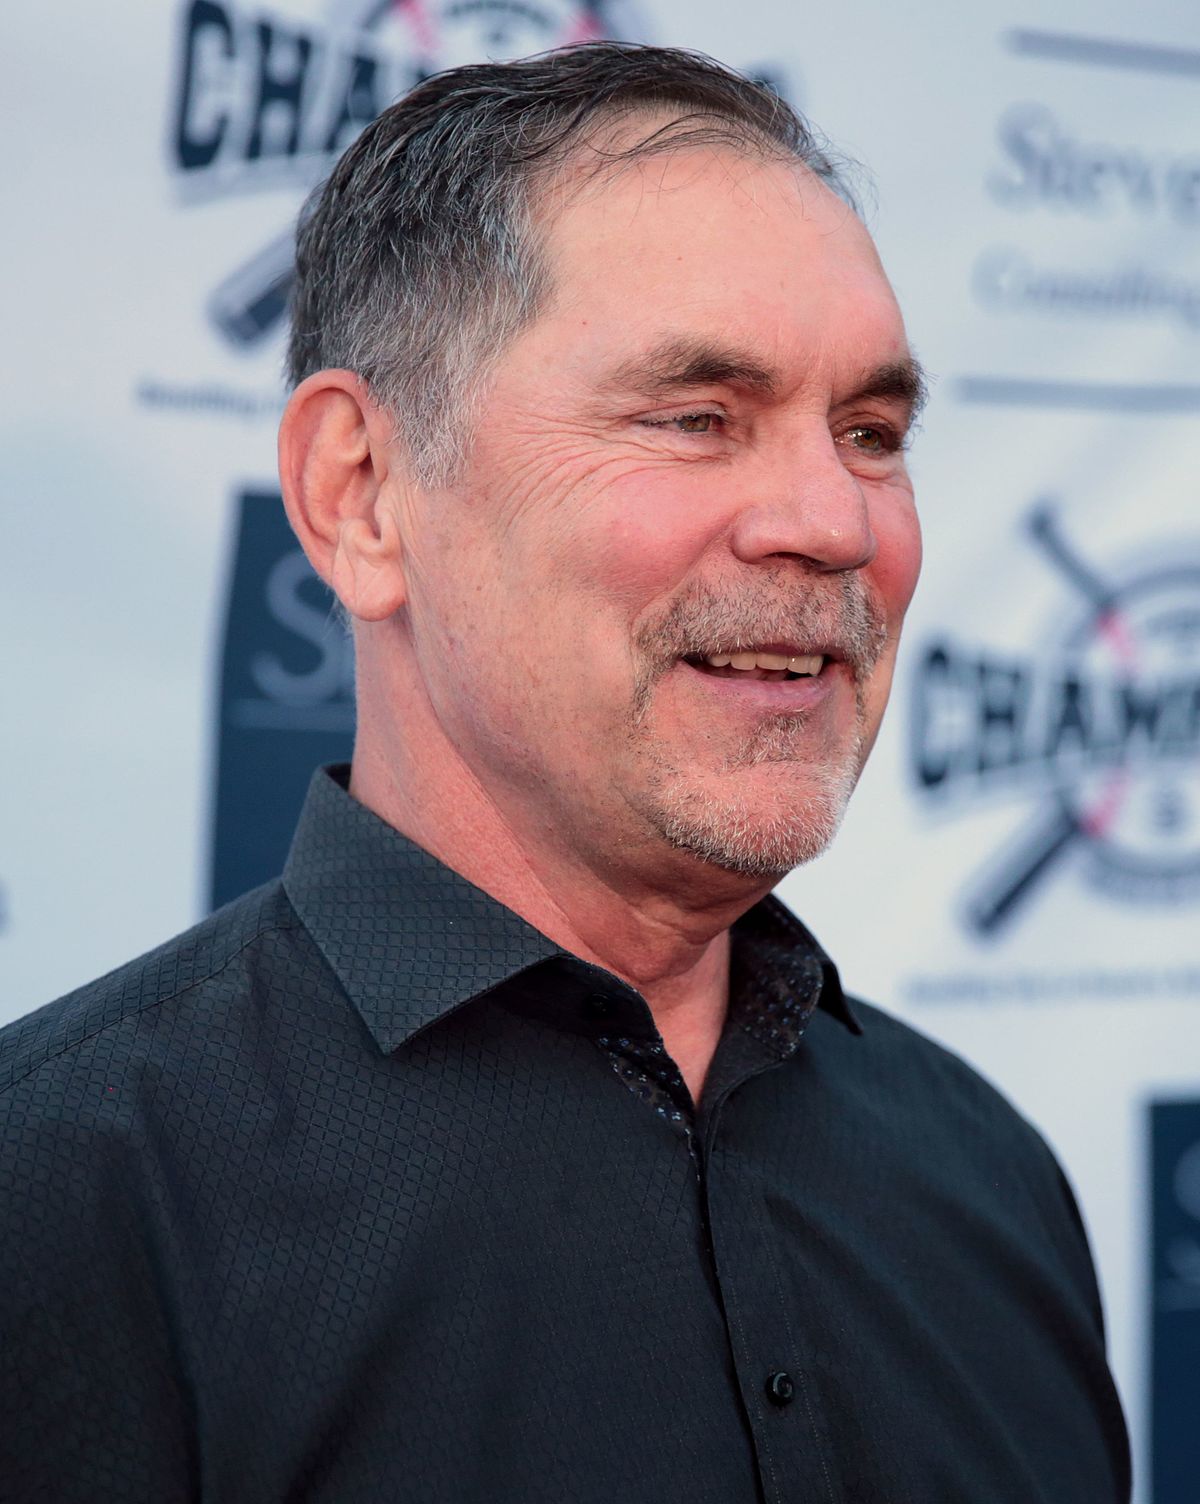 S.F. Giants' Bruce Bochy has humble approach